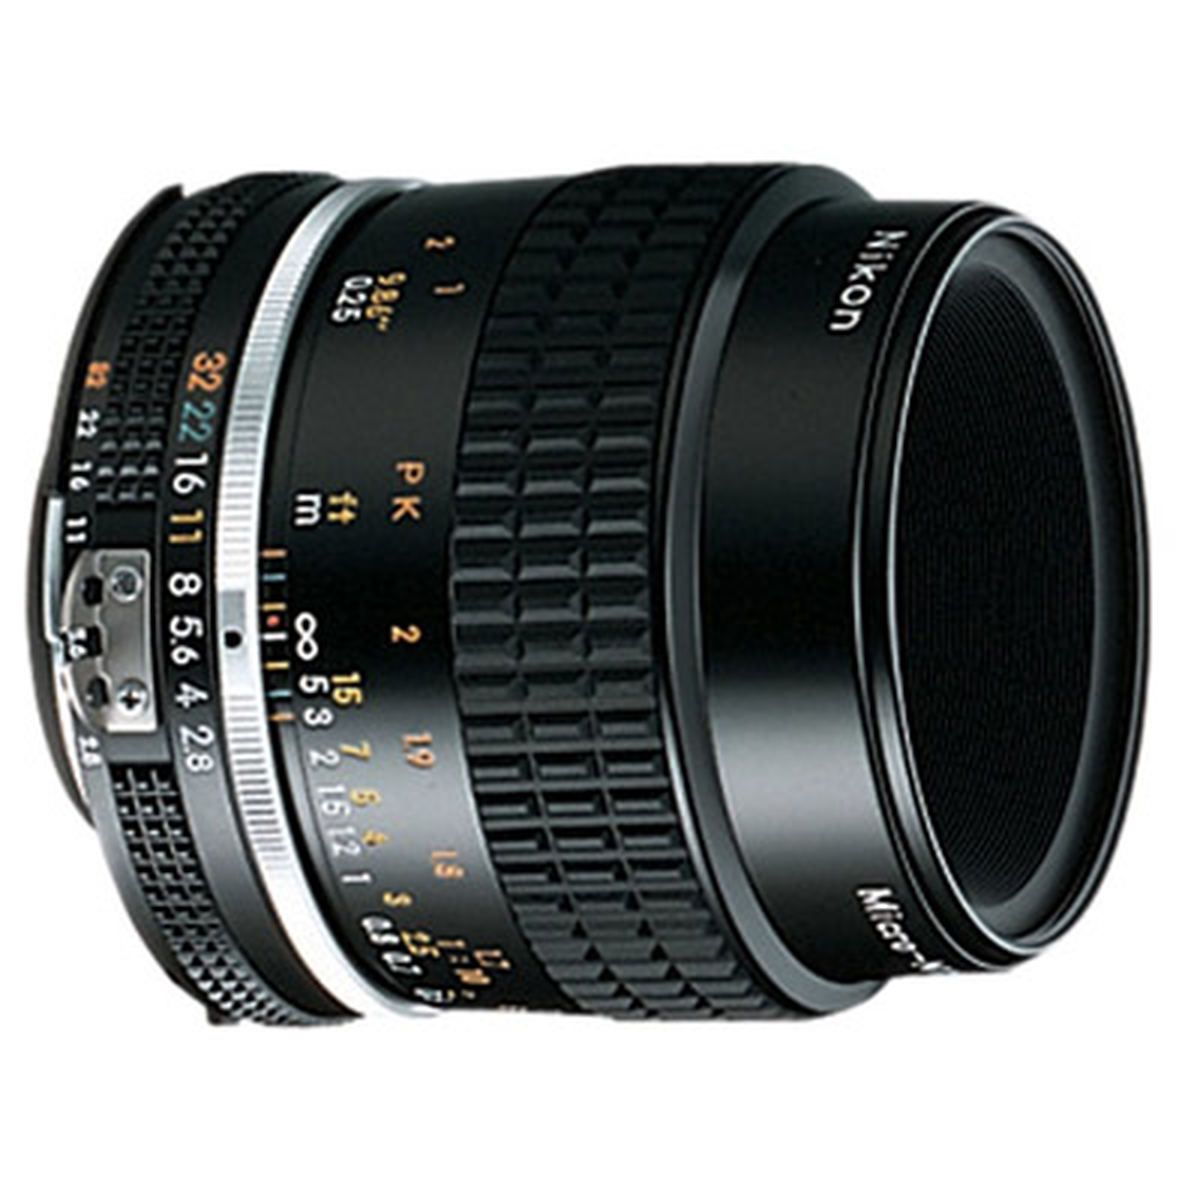 Nikon 55mm f/2.8 Micro AI-s : Specifications and Opinions | JuzaPhoto